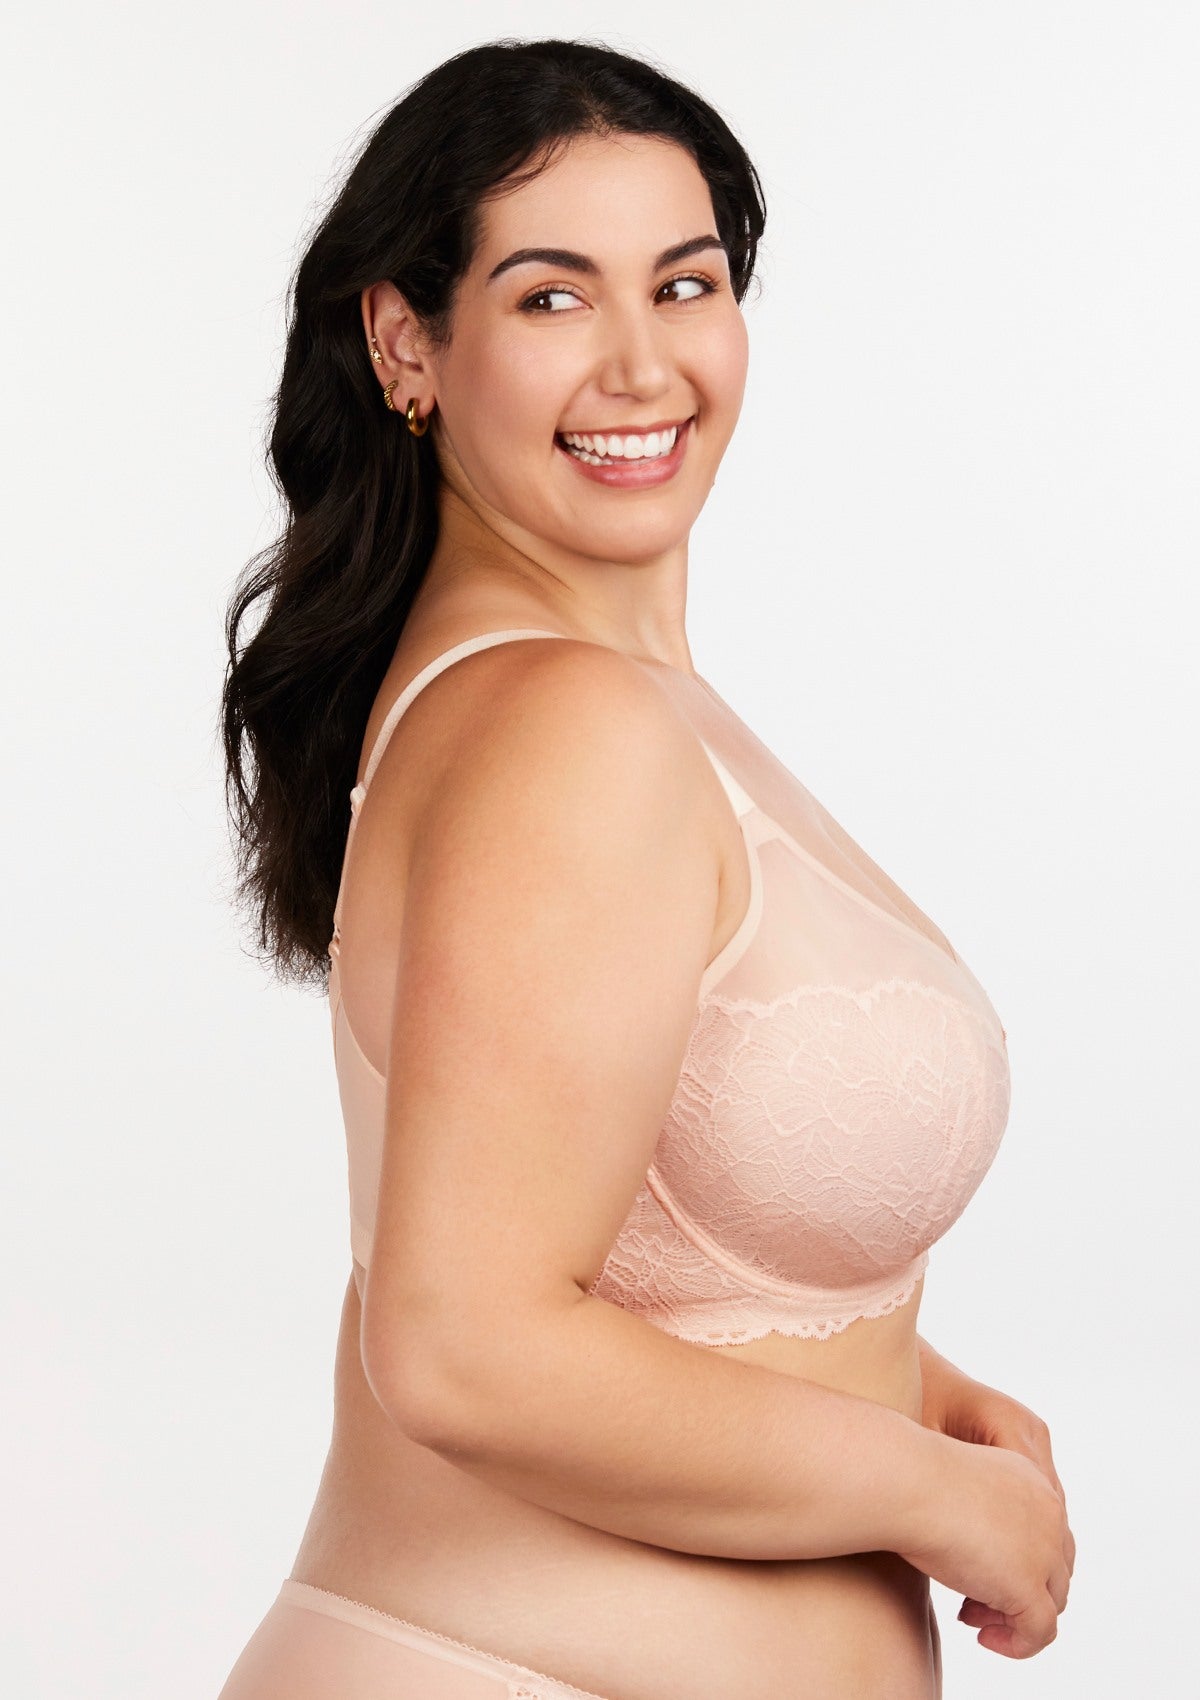 HSIA Blossom Sheer Lace Bra: Comfortable Underwire Bra For Big Busts - White / 36 / D